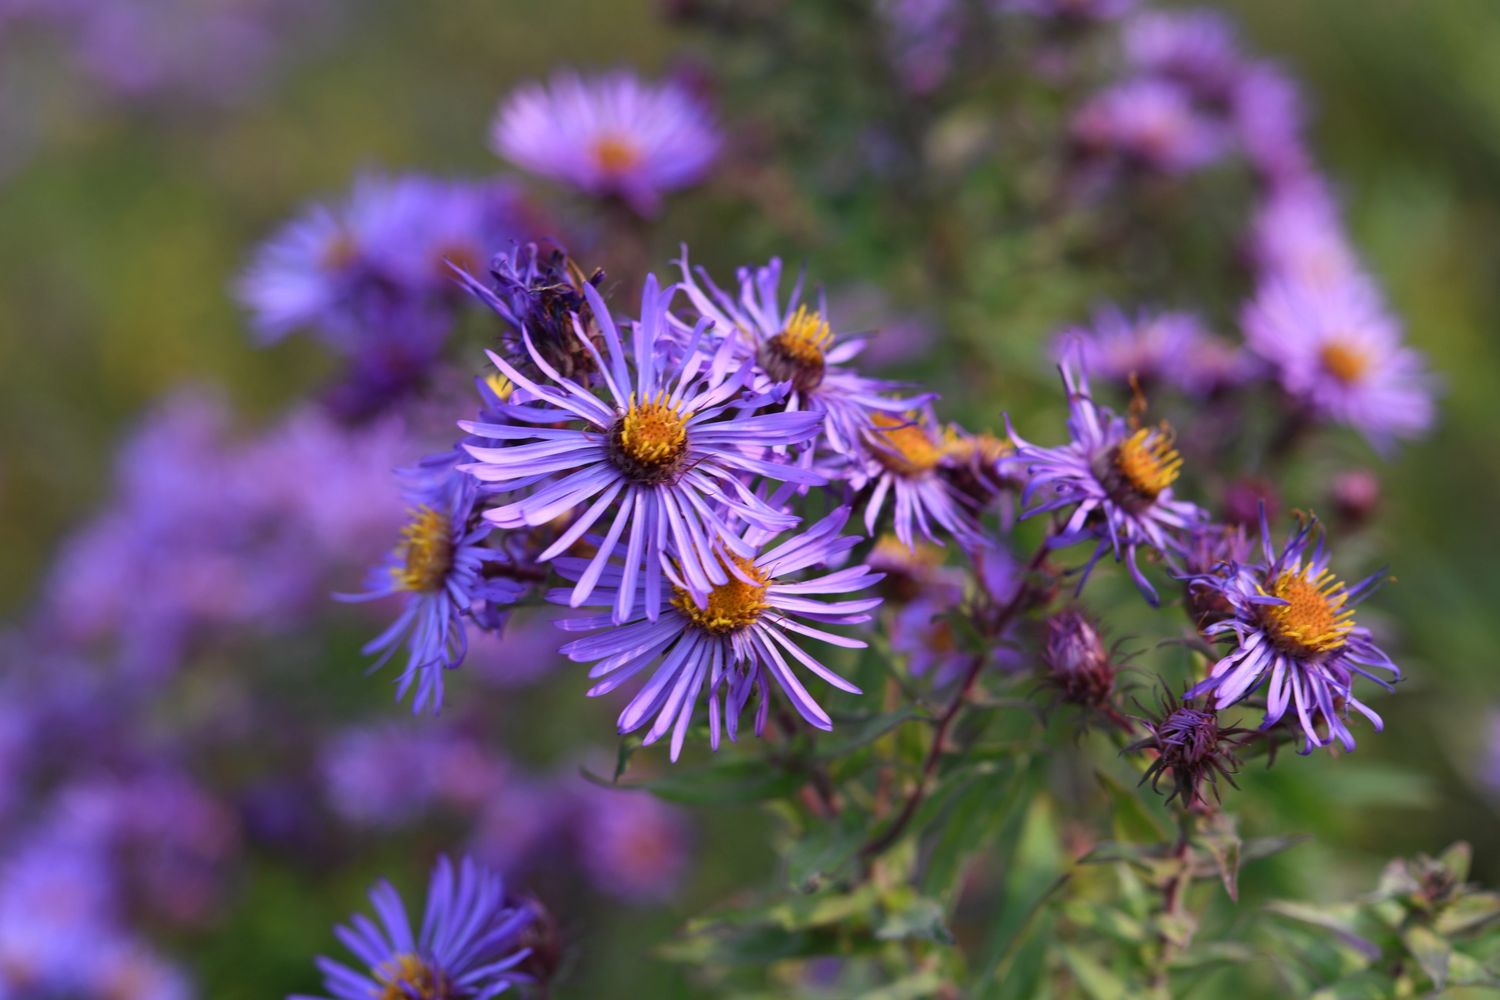 A clump of aster flowers. Original photograph by A Ellie Mitchell.